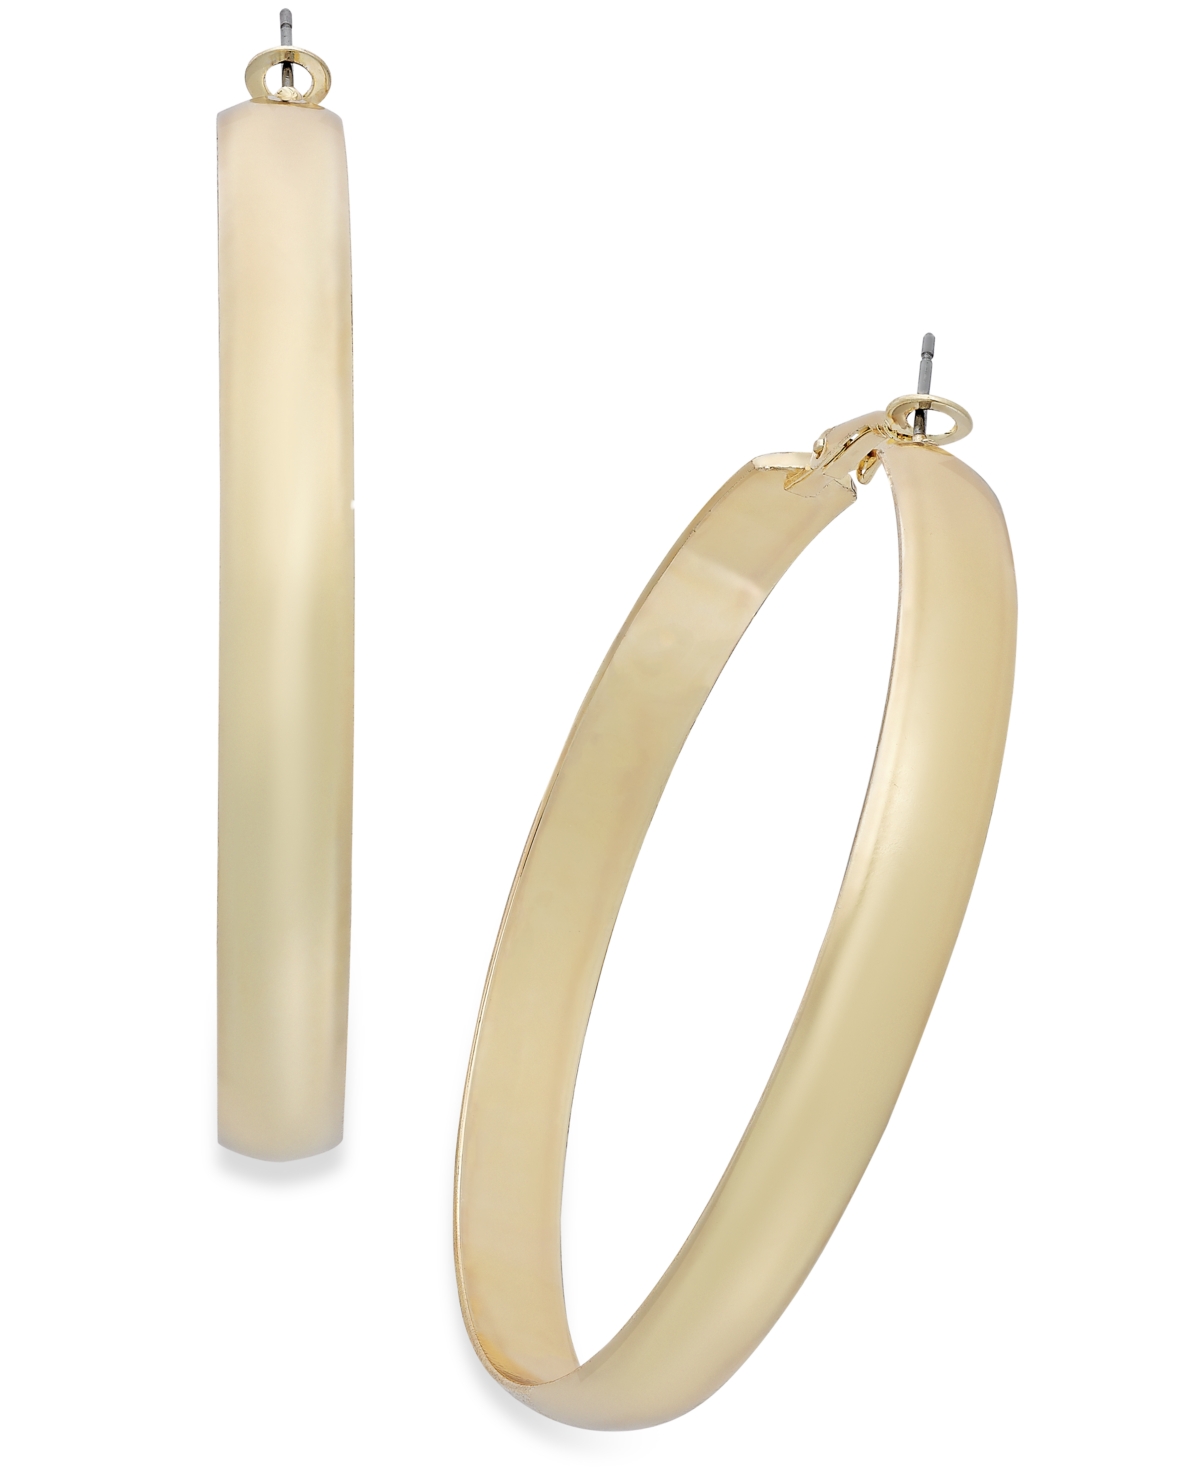 Gold-Tone Large Flat Hoop Earrings, 2.5", Created for Macy's - Gold